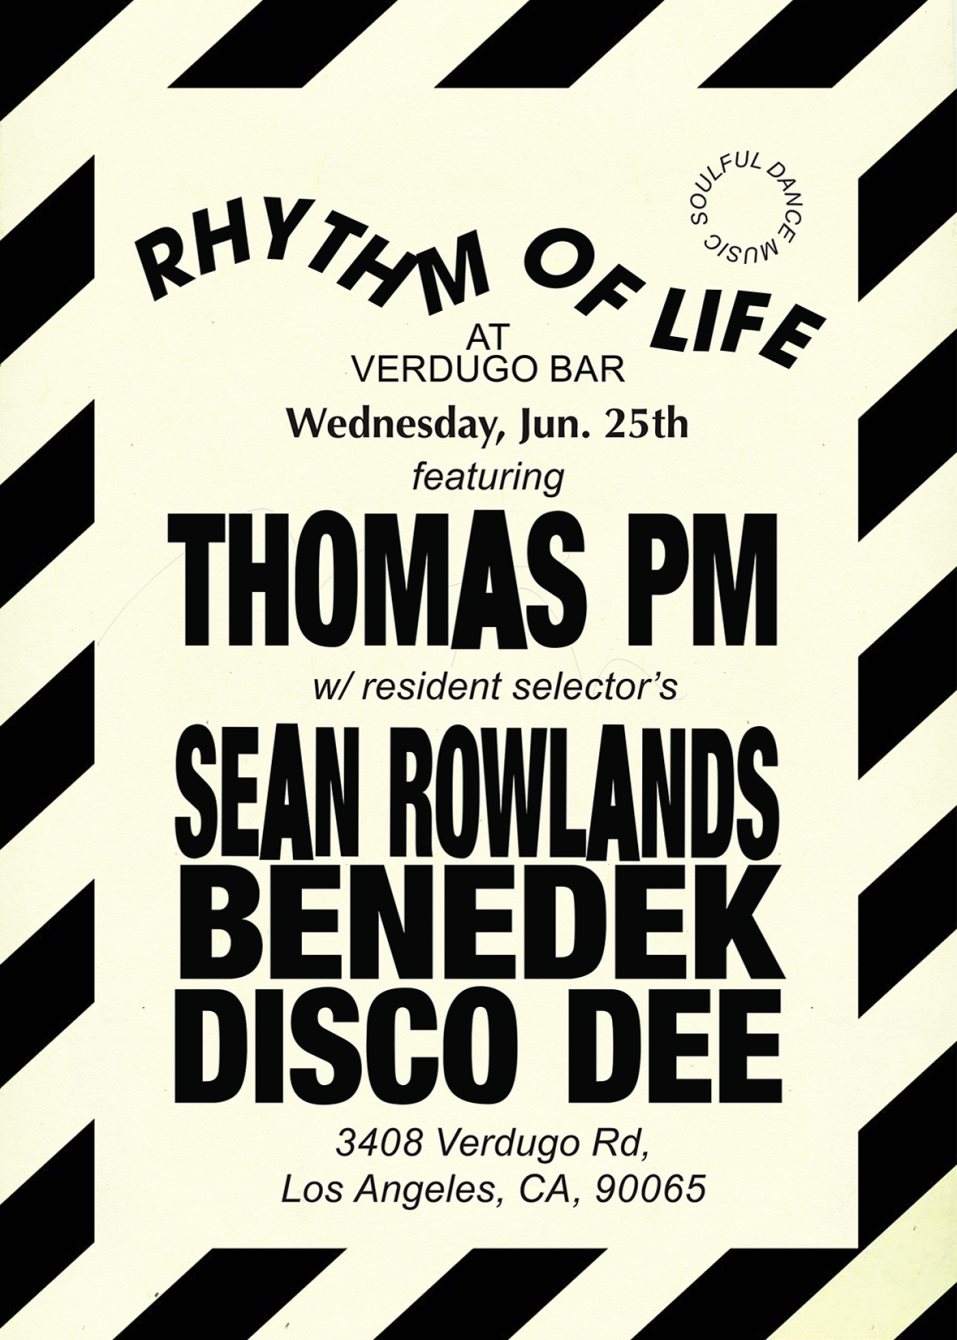 Rhythm Of Life with Special Guest DJ Thomas PM  - フライヤー表